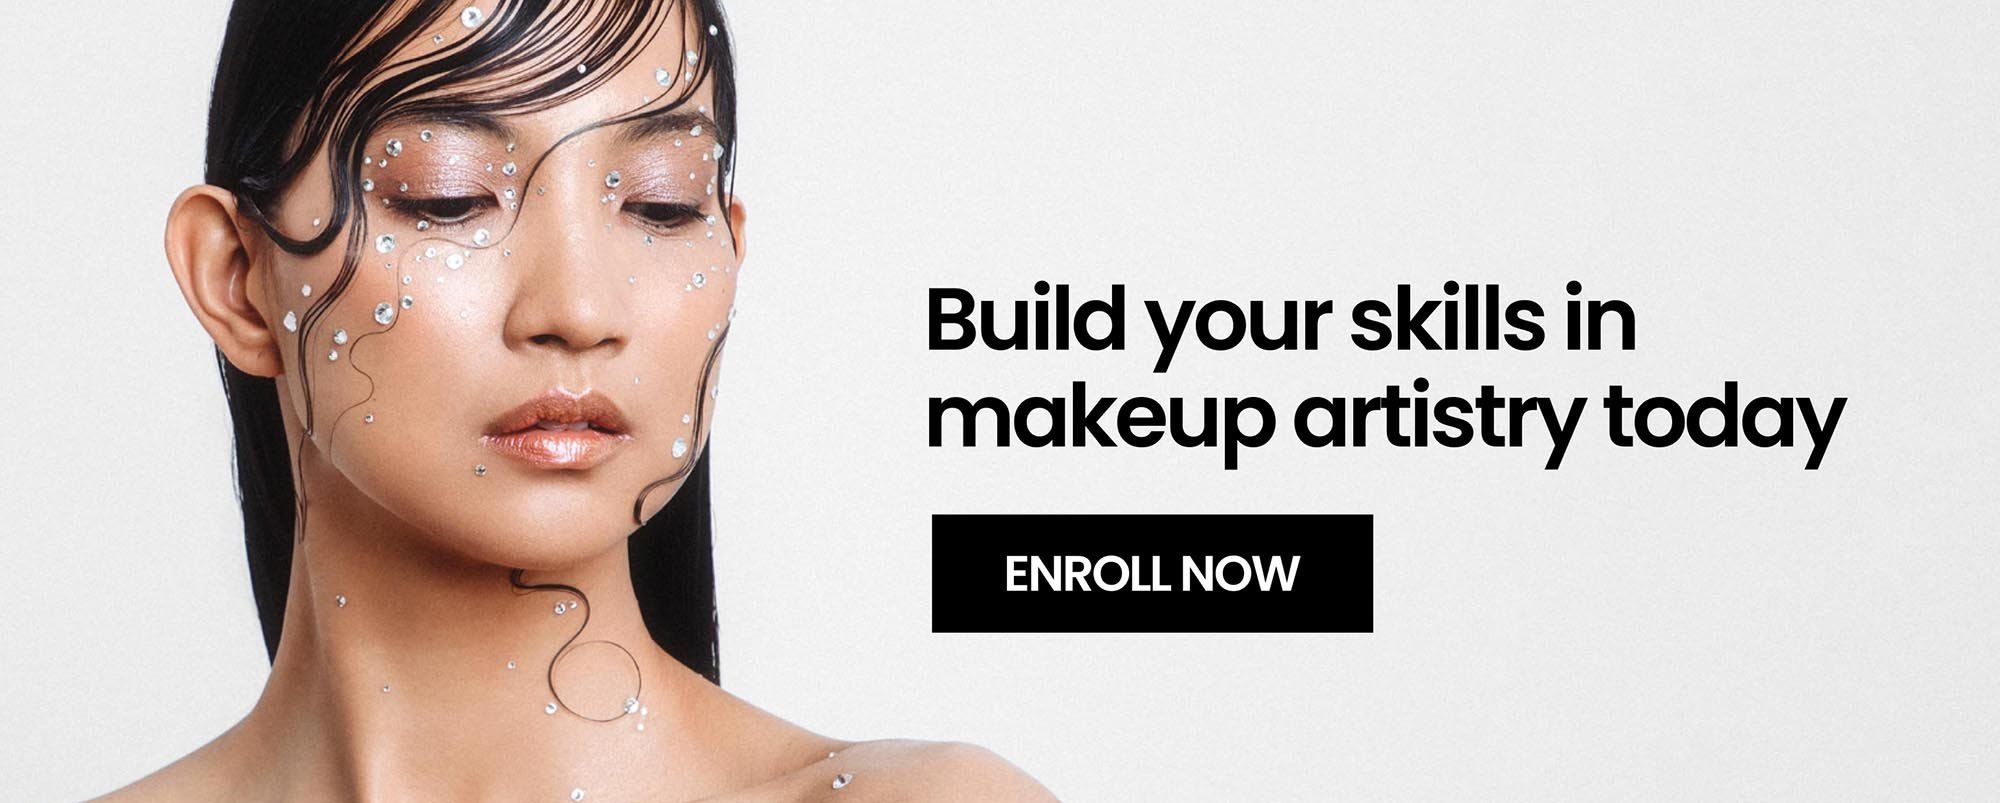 How To Become A Makeup Artist